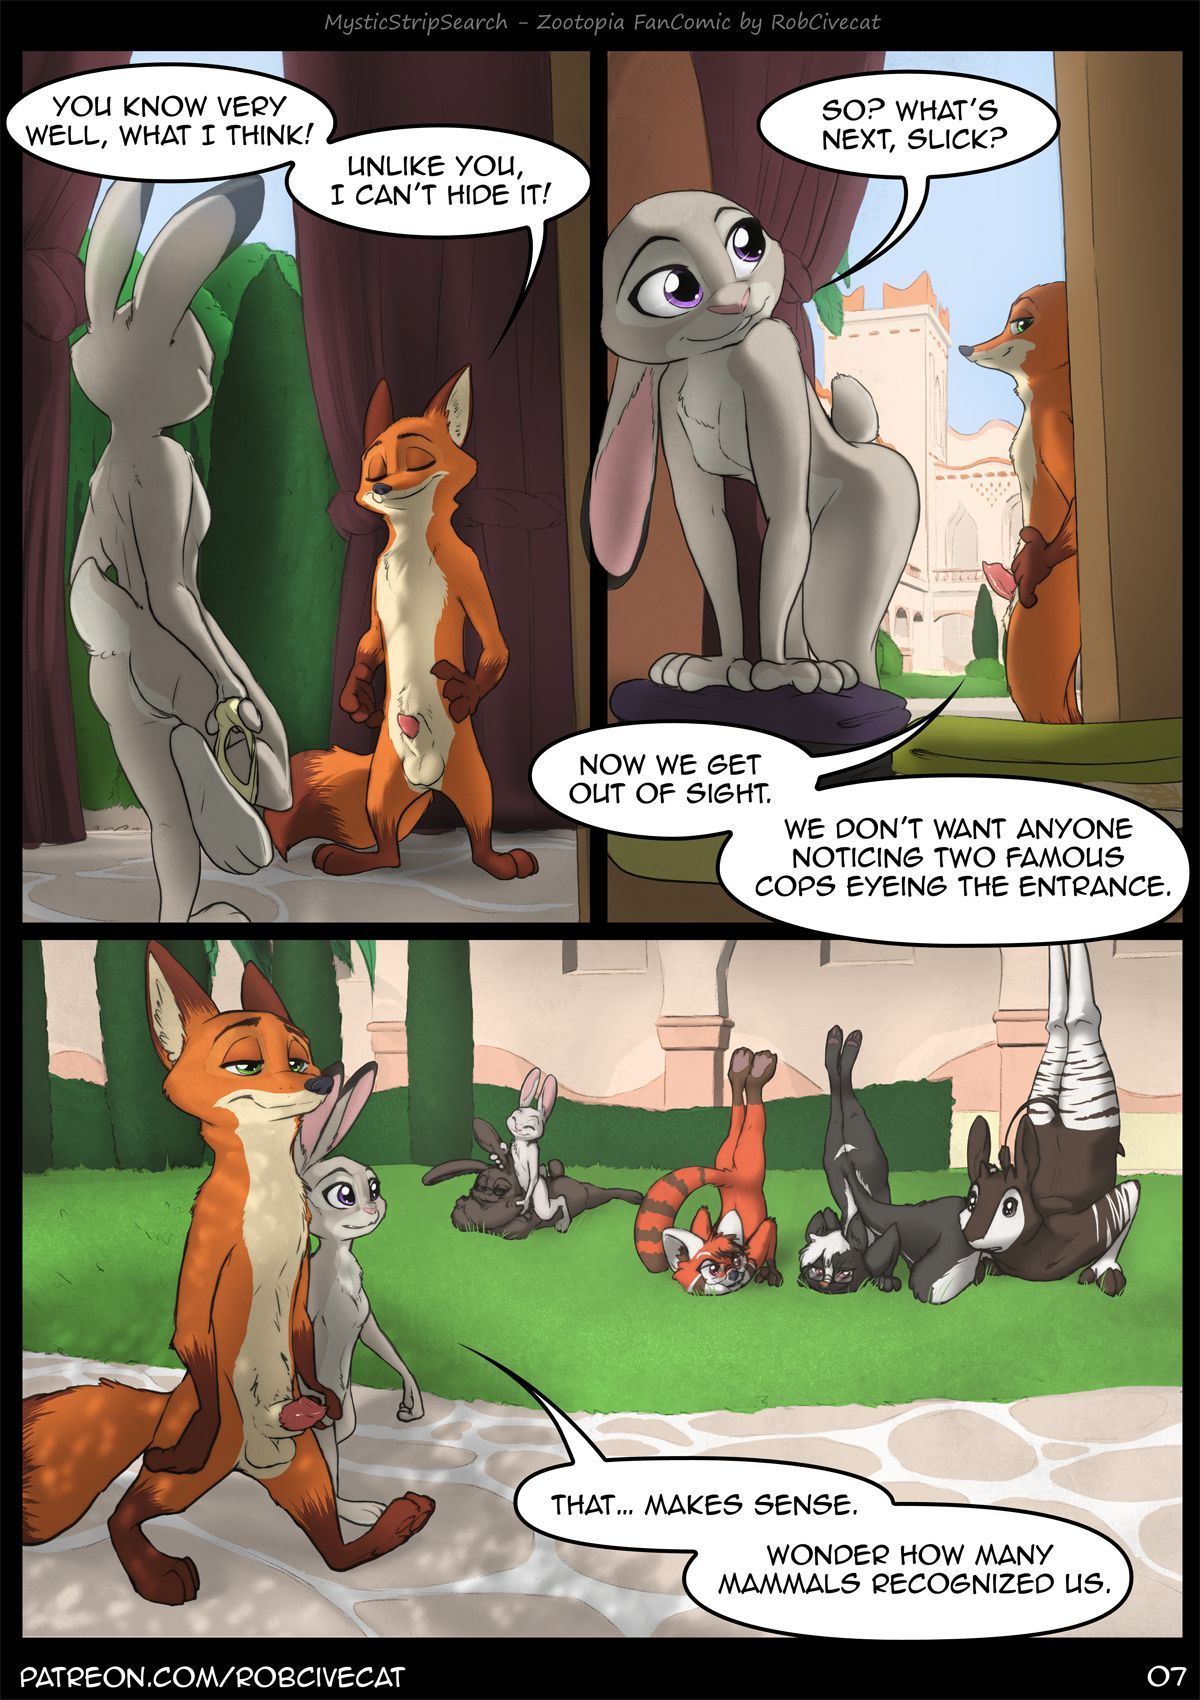 [RobCivecat] Mystic Strip Search (Zootopia) [Ongoing] 8